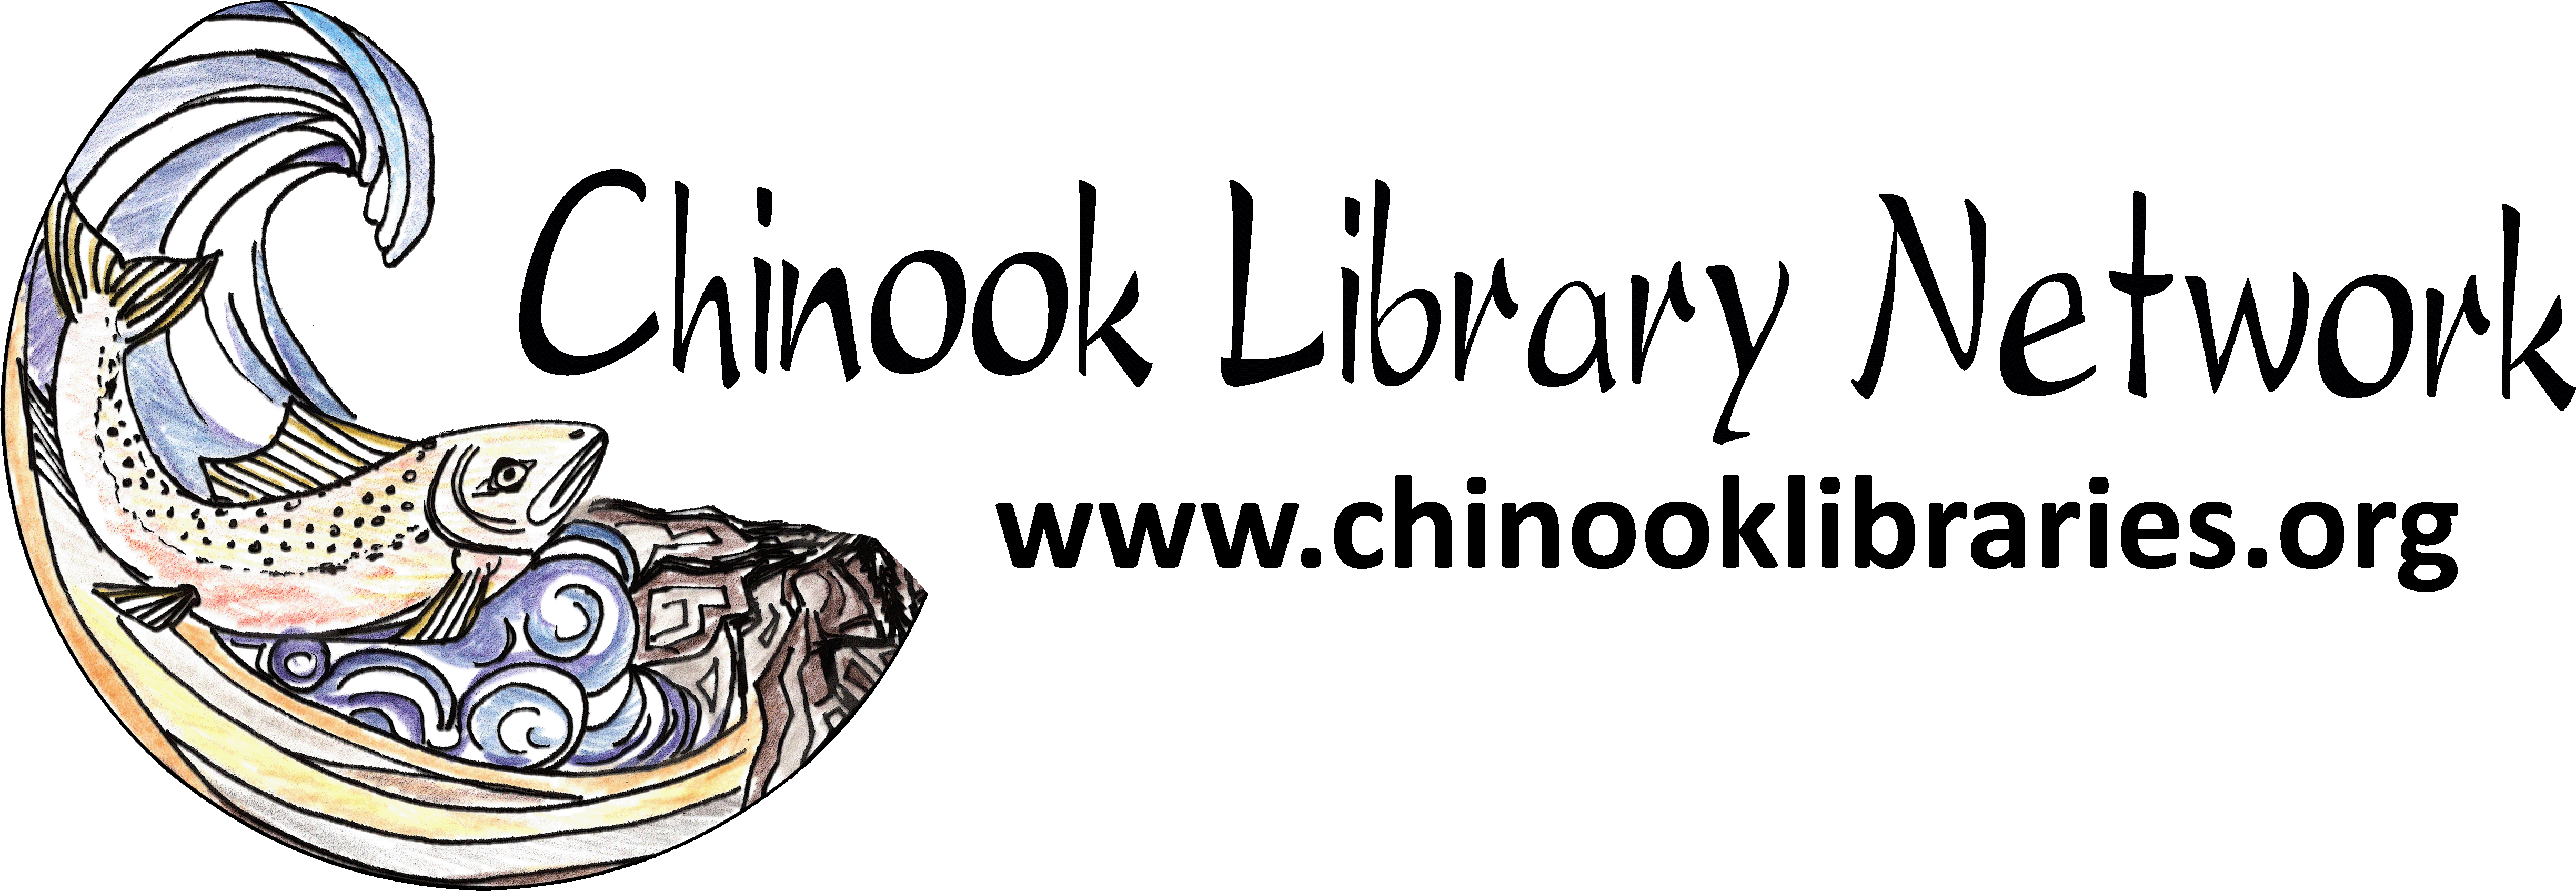 Chinook Libraries Image